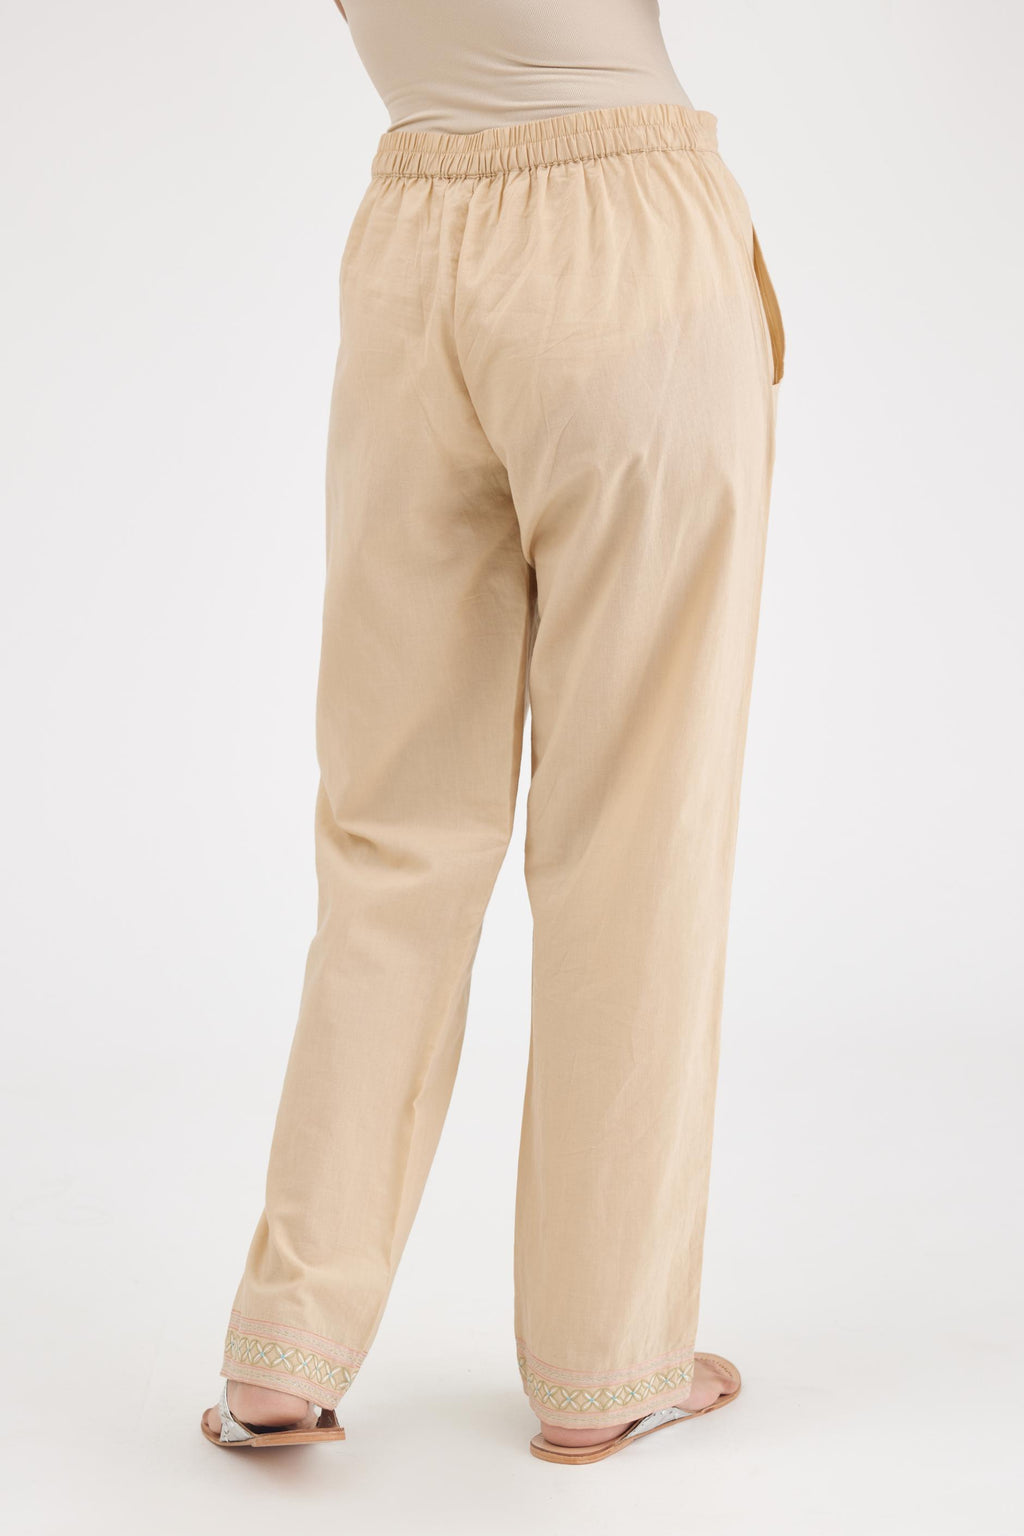 Beige cotton straight pants with multi colored thread embroidery, highlighted with silver zari embroidery at bottom hem